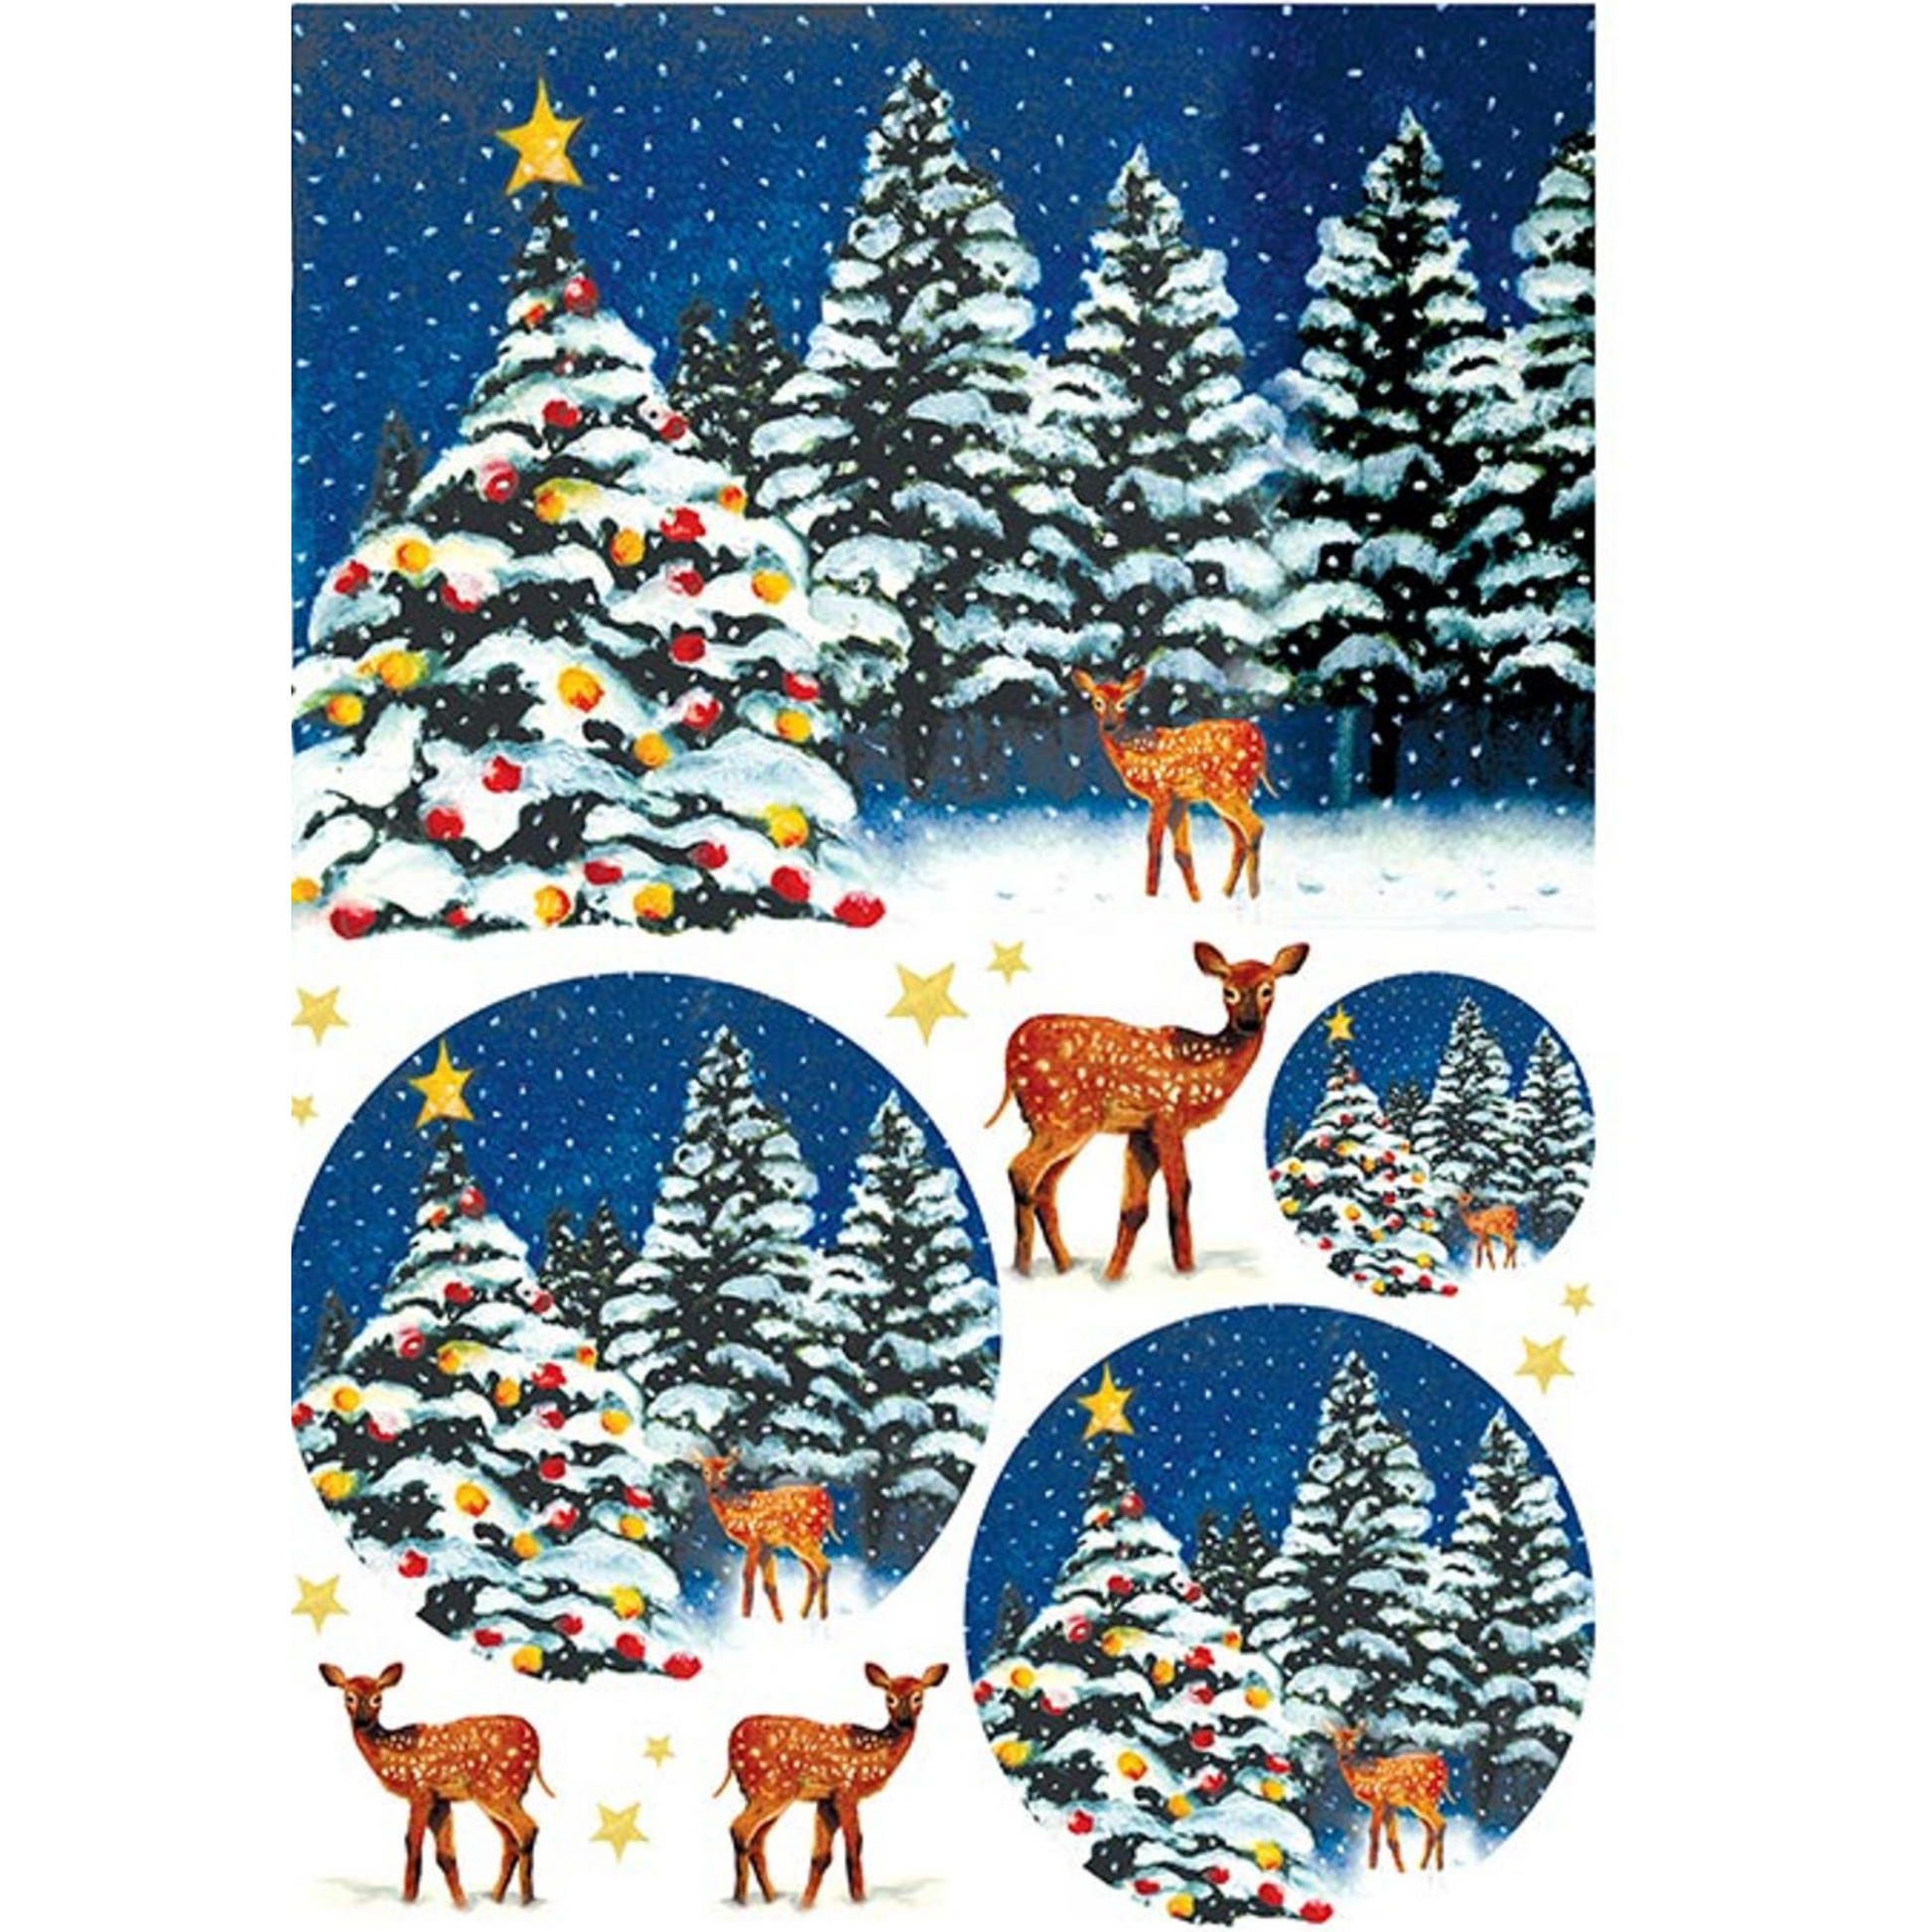 "Deer in the Snow" decoupage rice paper by Paper Designs. Available at Milton's Daughter.